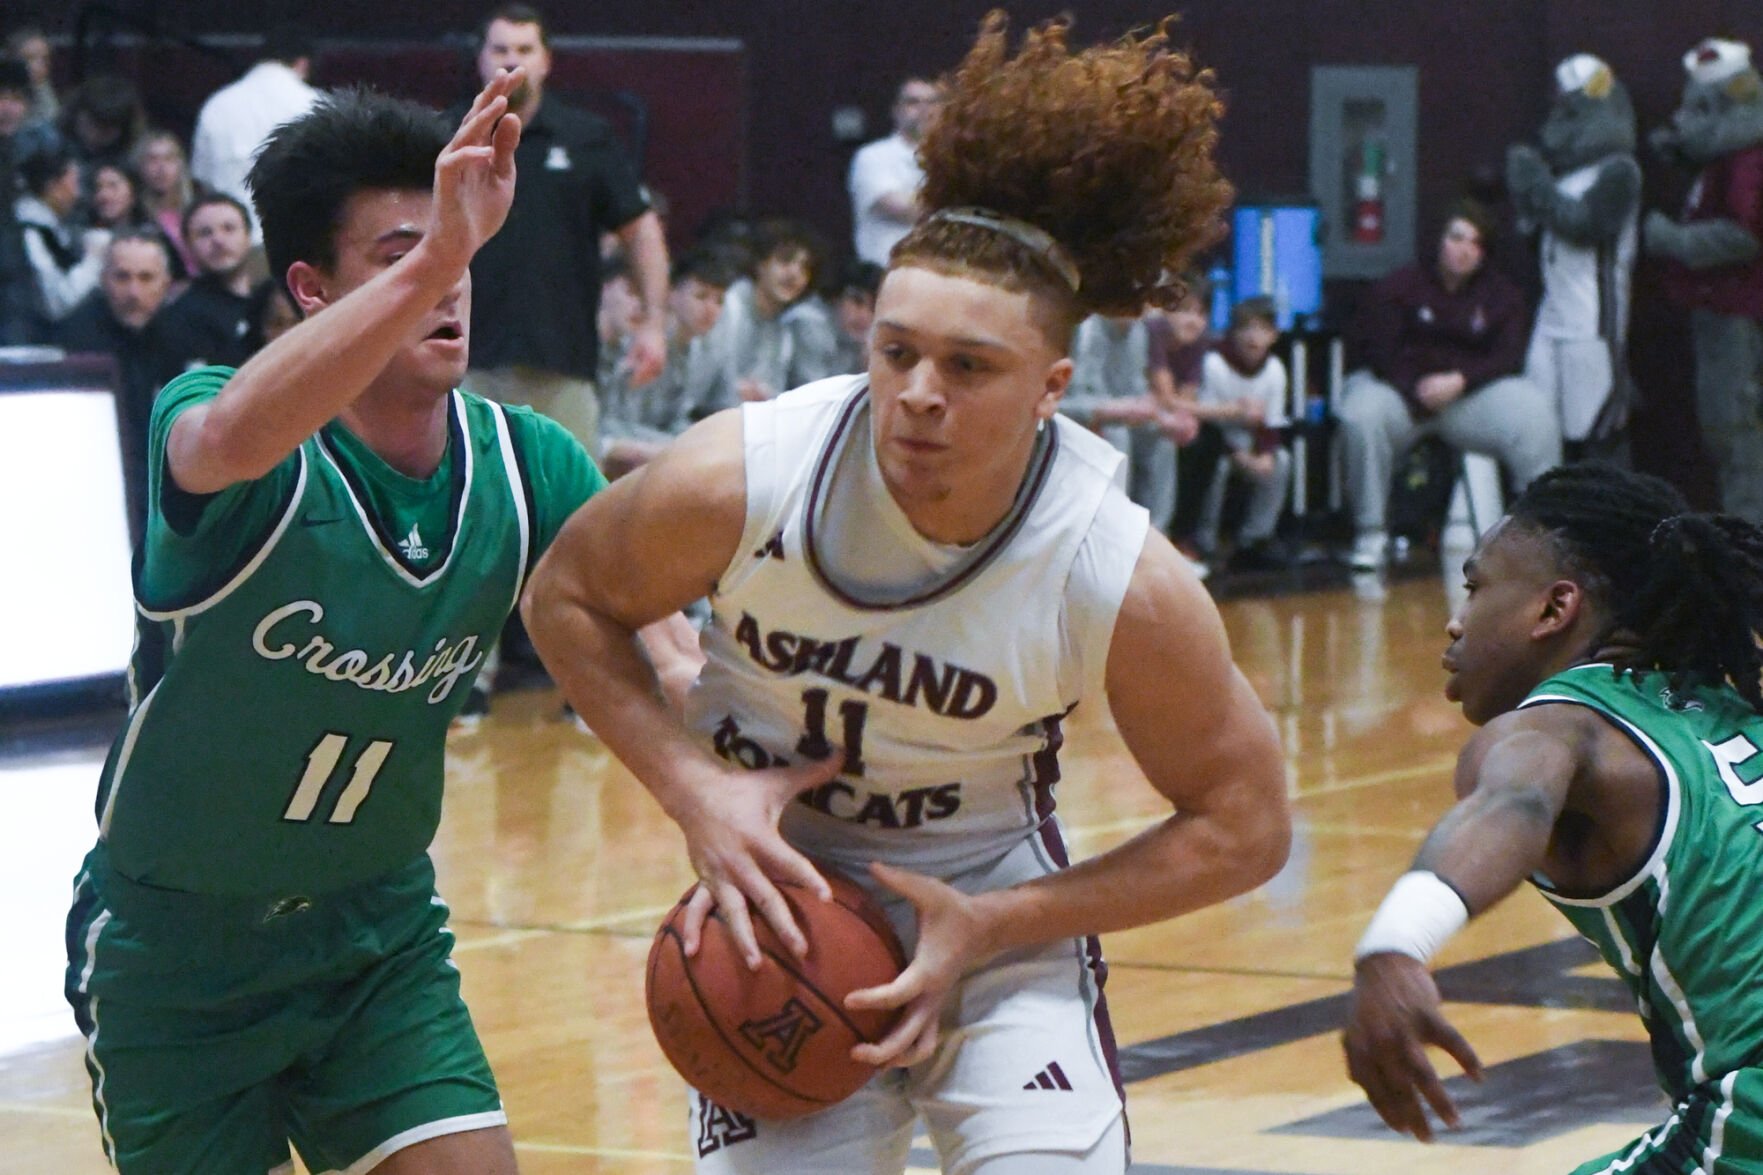 Great Crossing Dominates Ashland with 72-59 Victory in High-Stakes Basketball Showdown